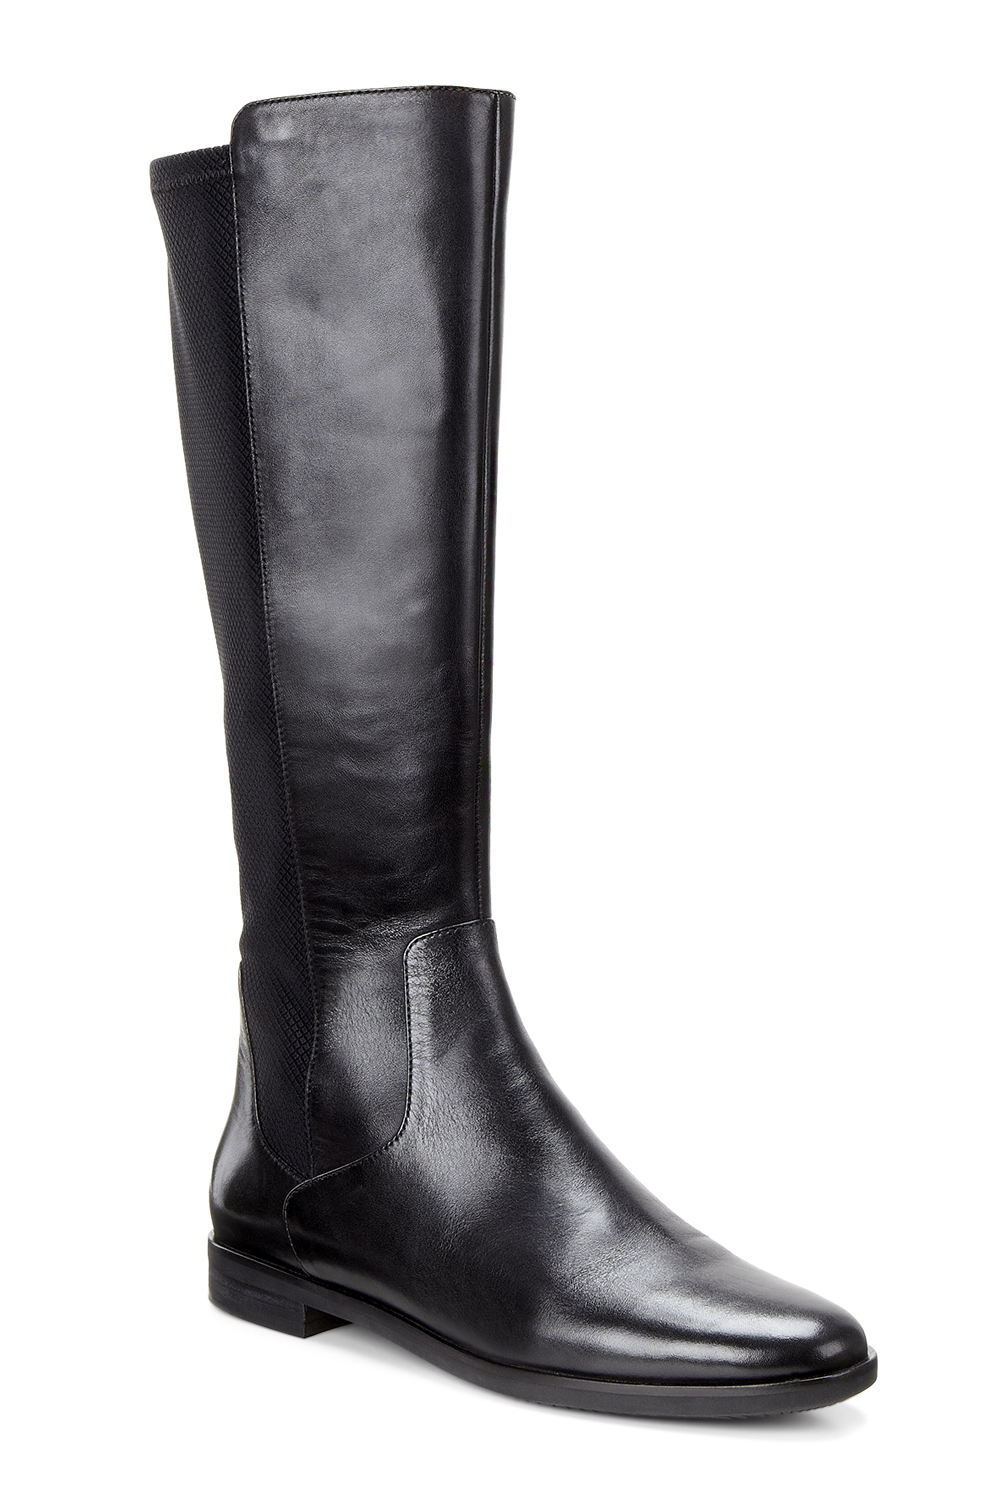 Boots, $429, by Ecco.